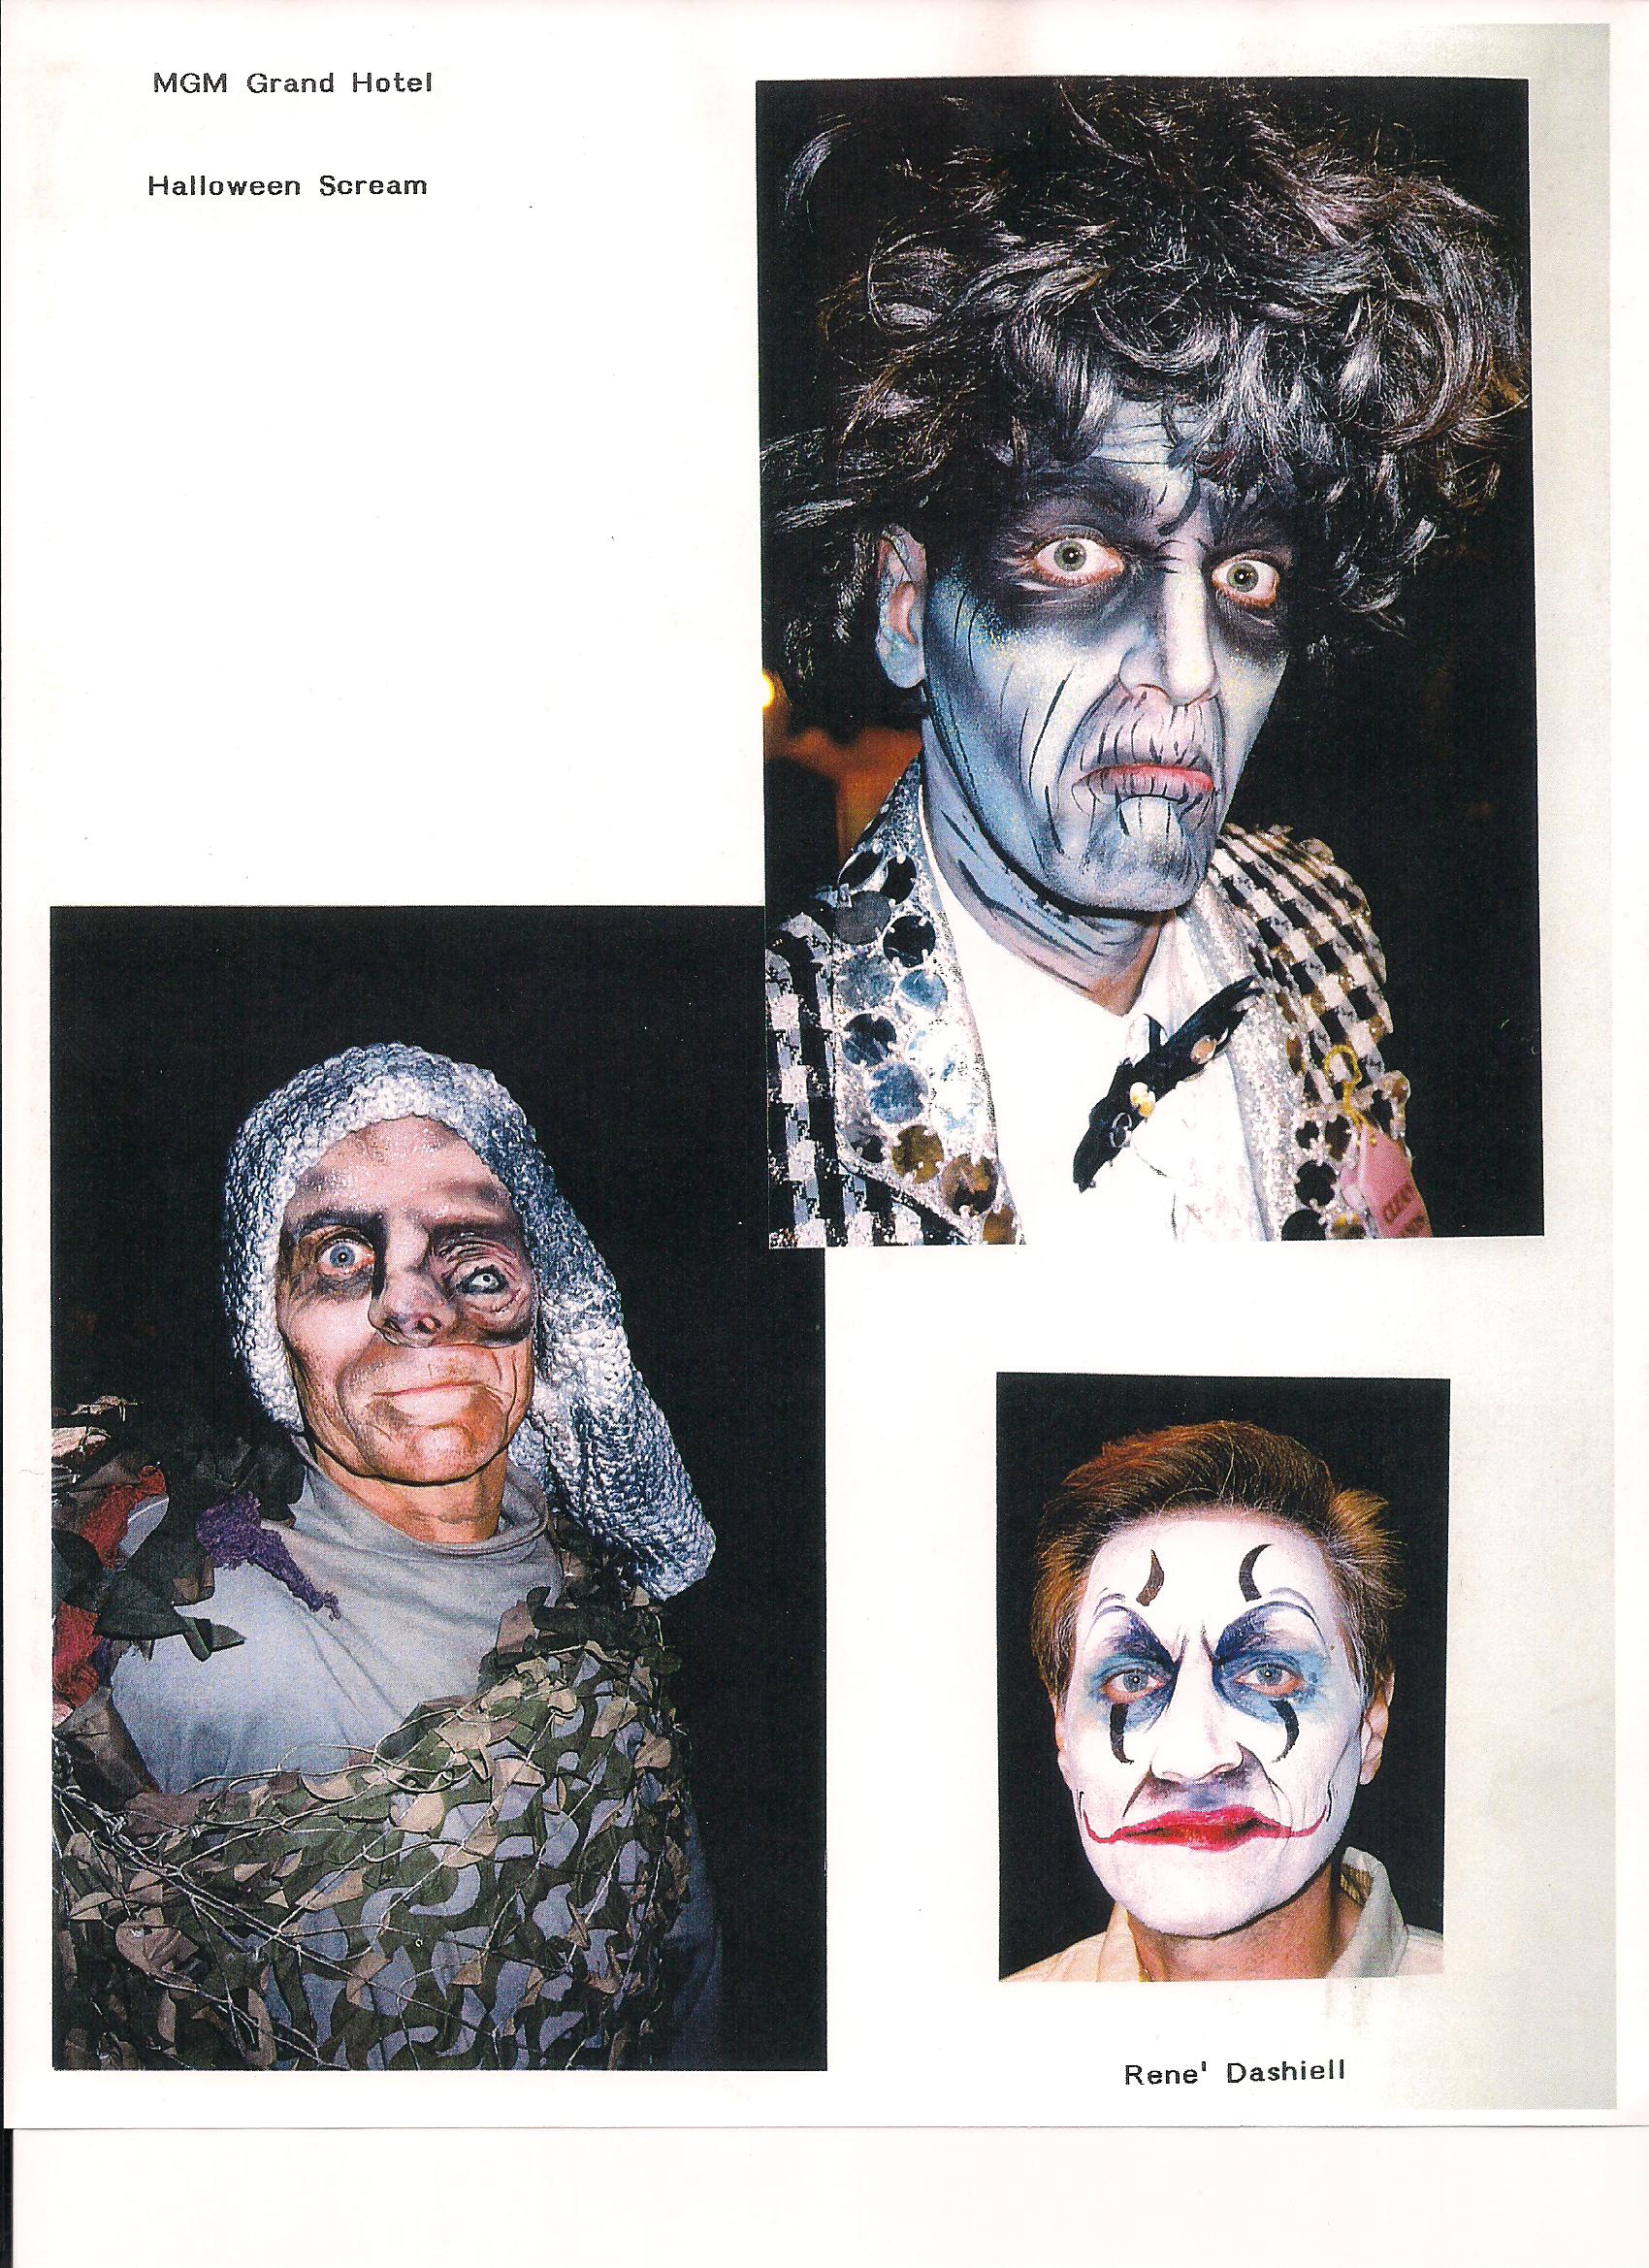 MGM Hotel's Halloween Scream Asst Characters for Annual Theme Park attraction, Las Vegas, NV